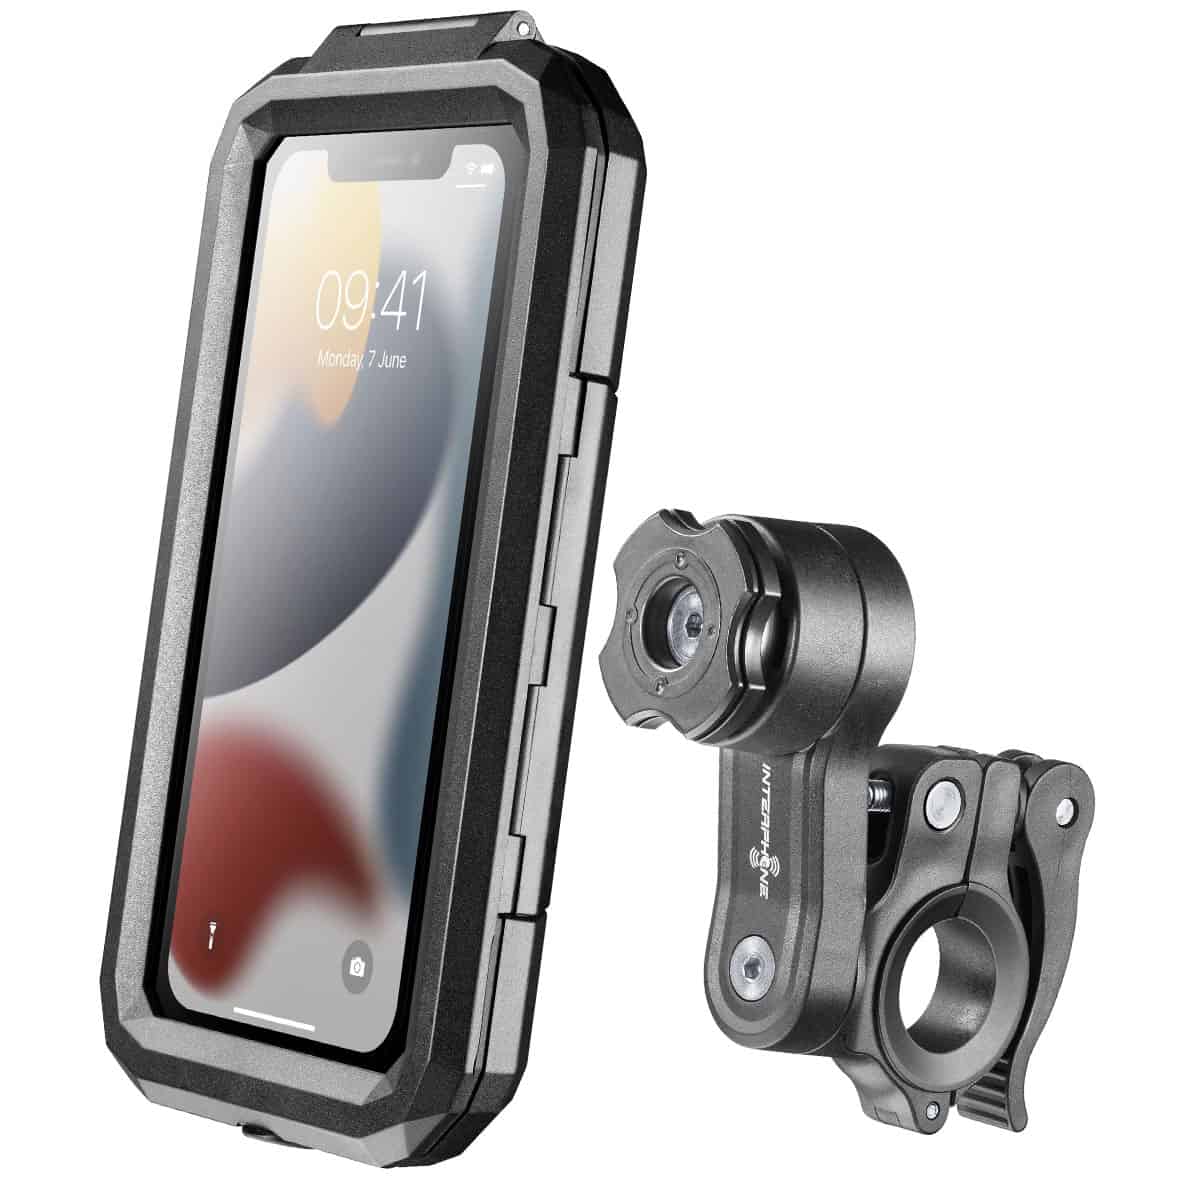 The Quiklox Armor Pro phone motorcycle handle bar mount & phone case: Rock-solid protection for your phone on the move